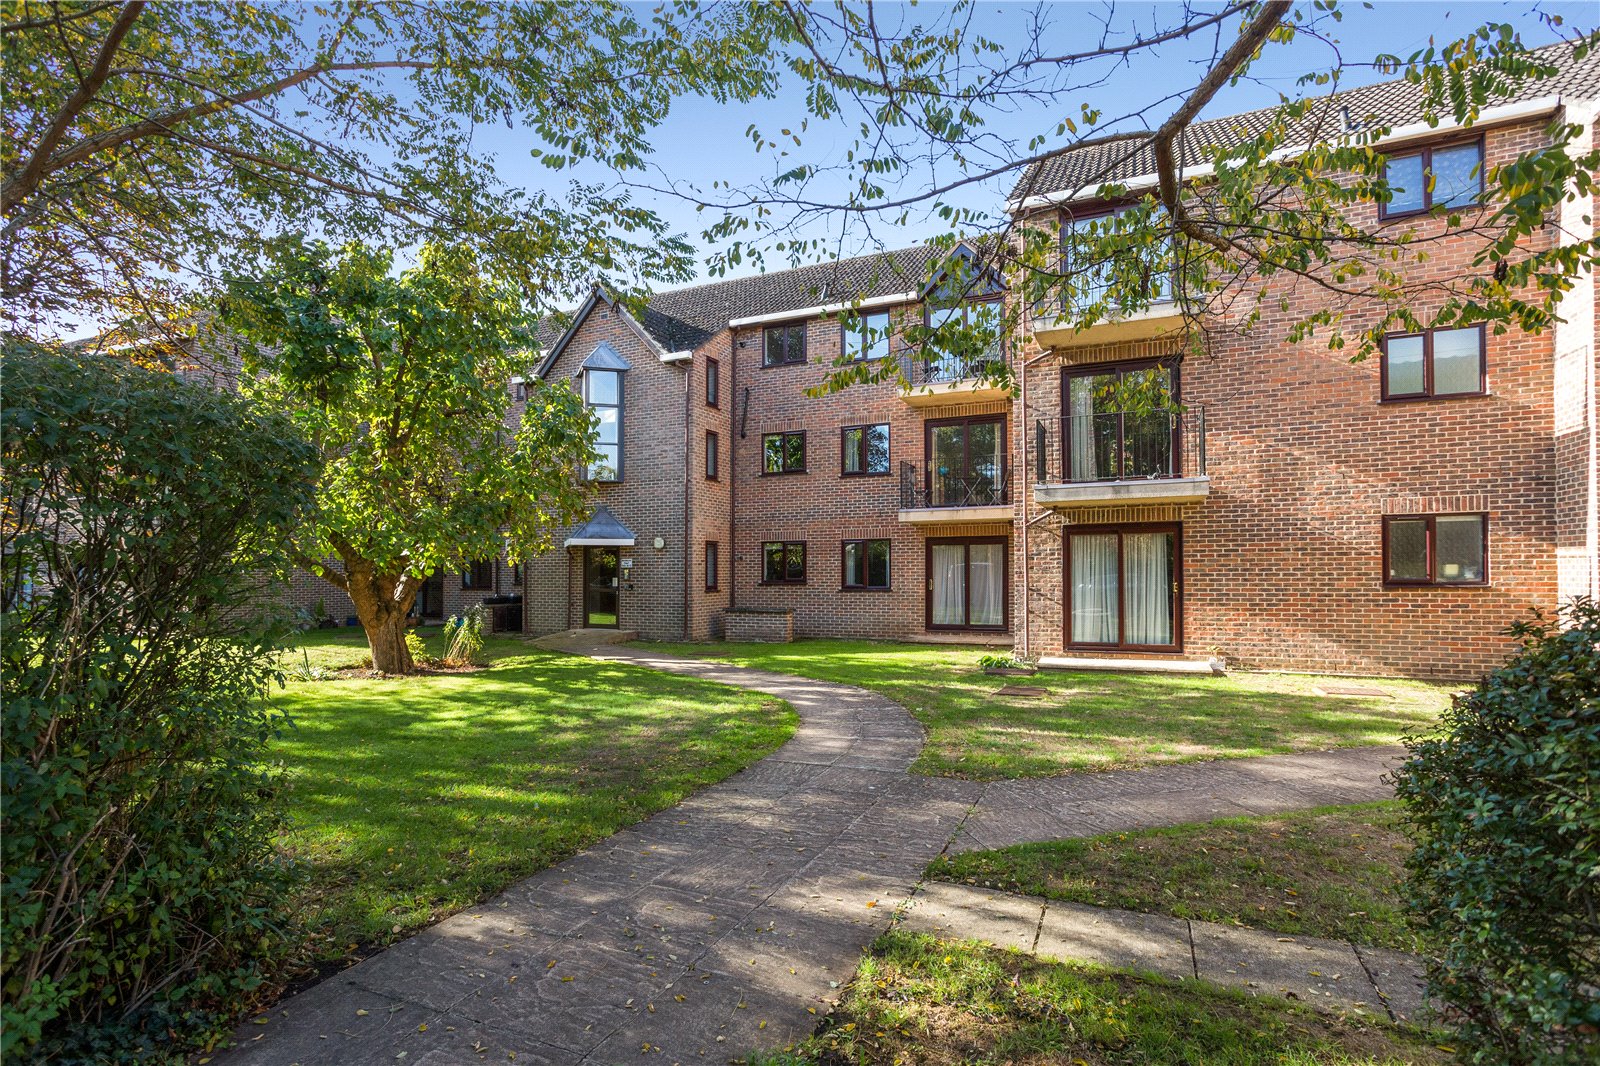 Dorchester Court, Ferry Pool Road, Oxford, Oxfordshire, OX2